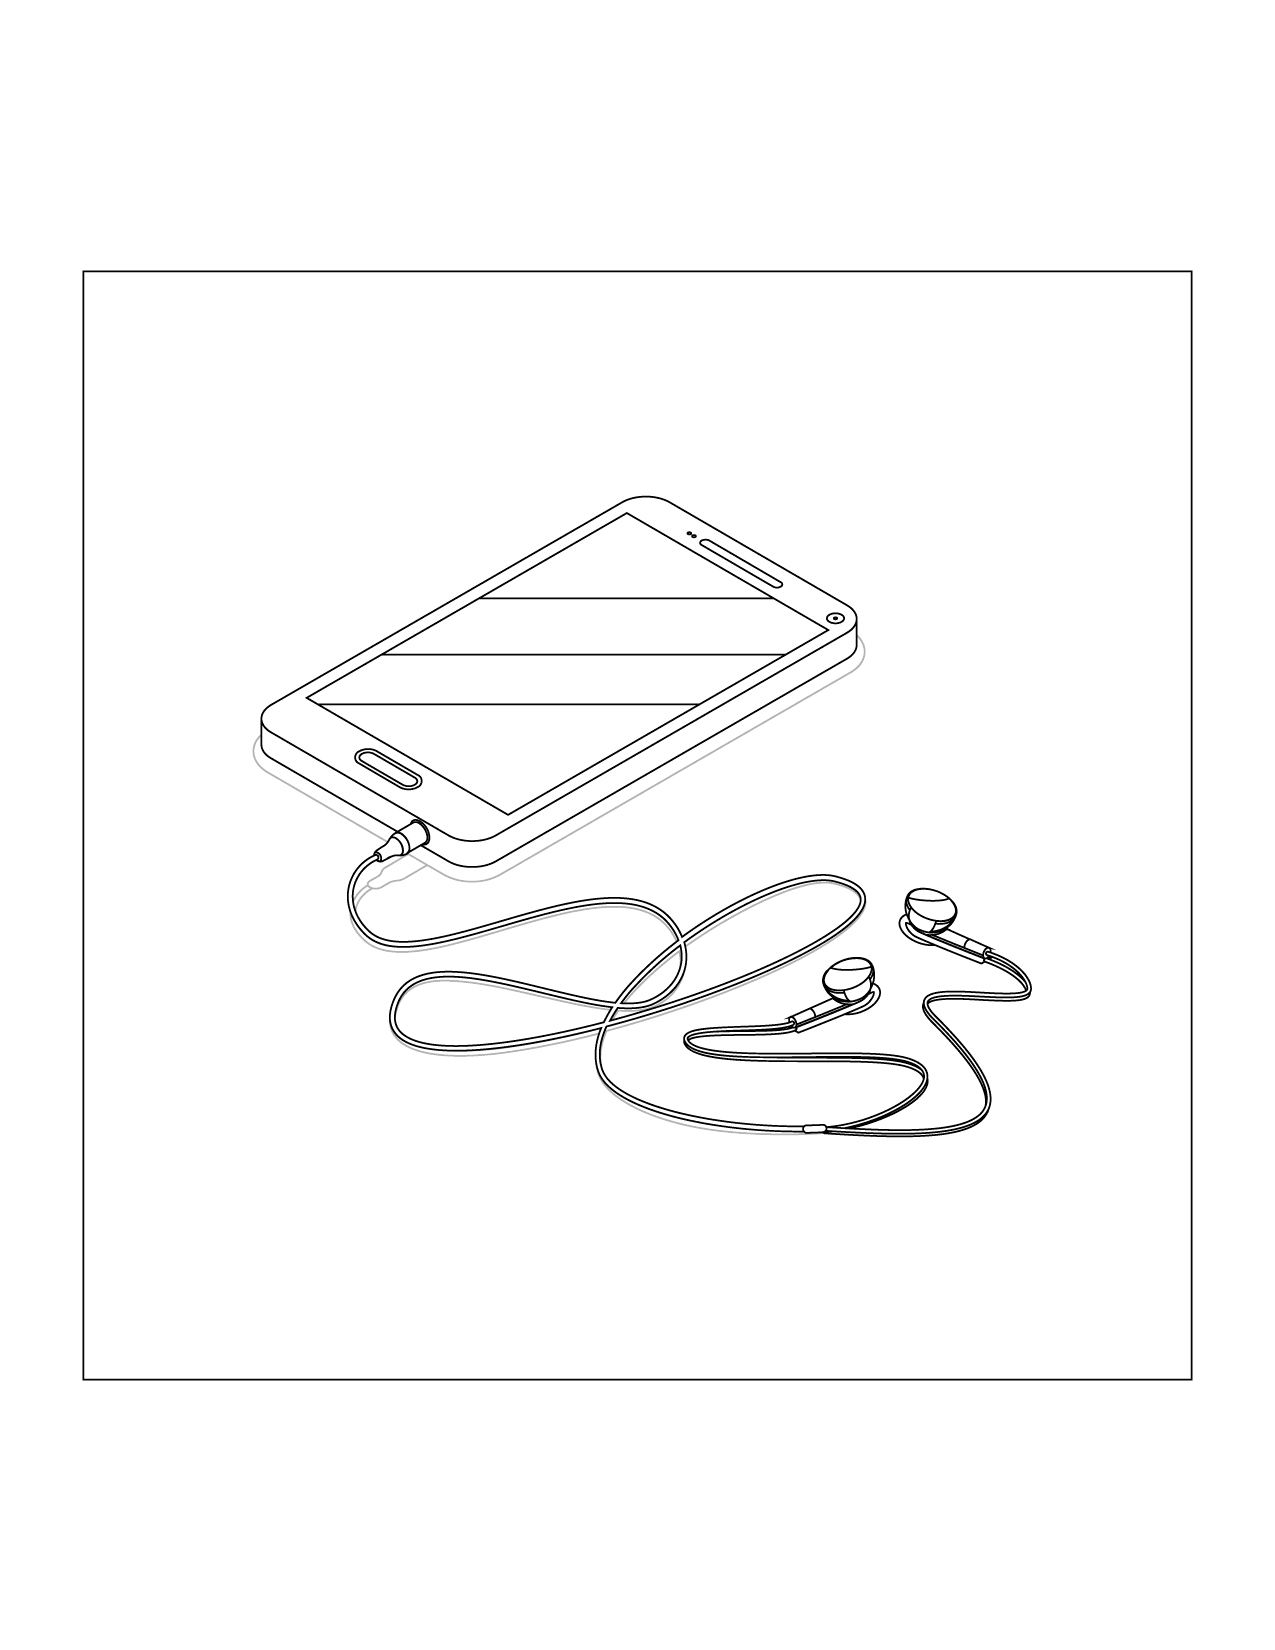 Phone With Earbuds Coloring Page